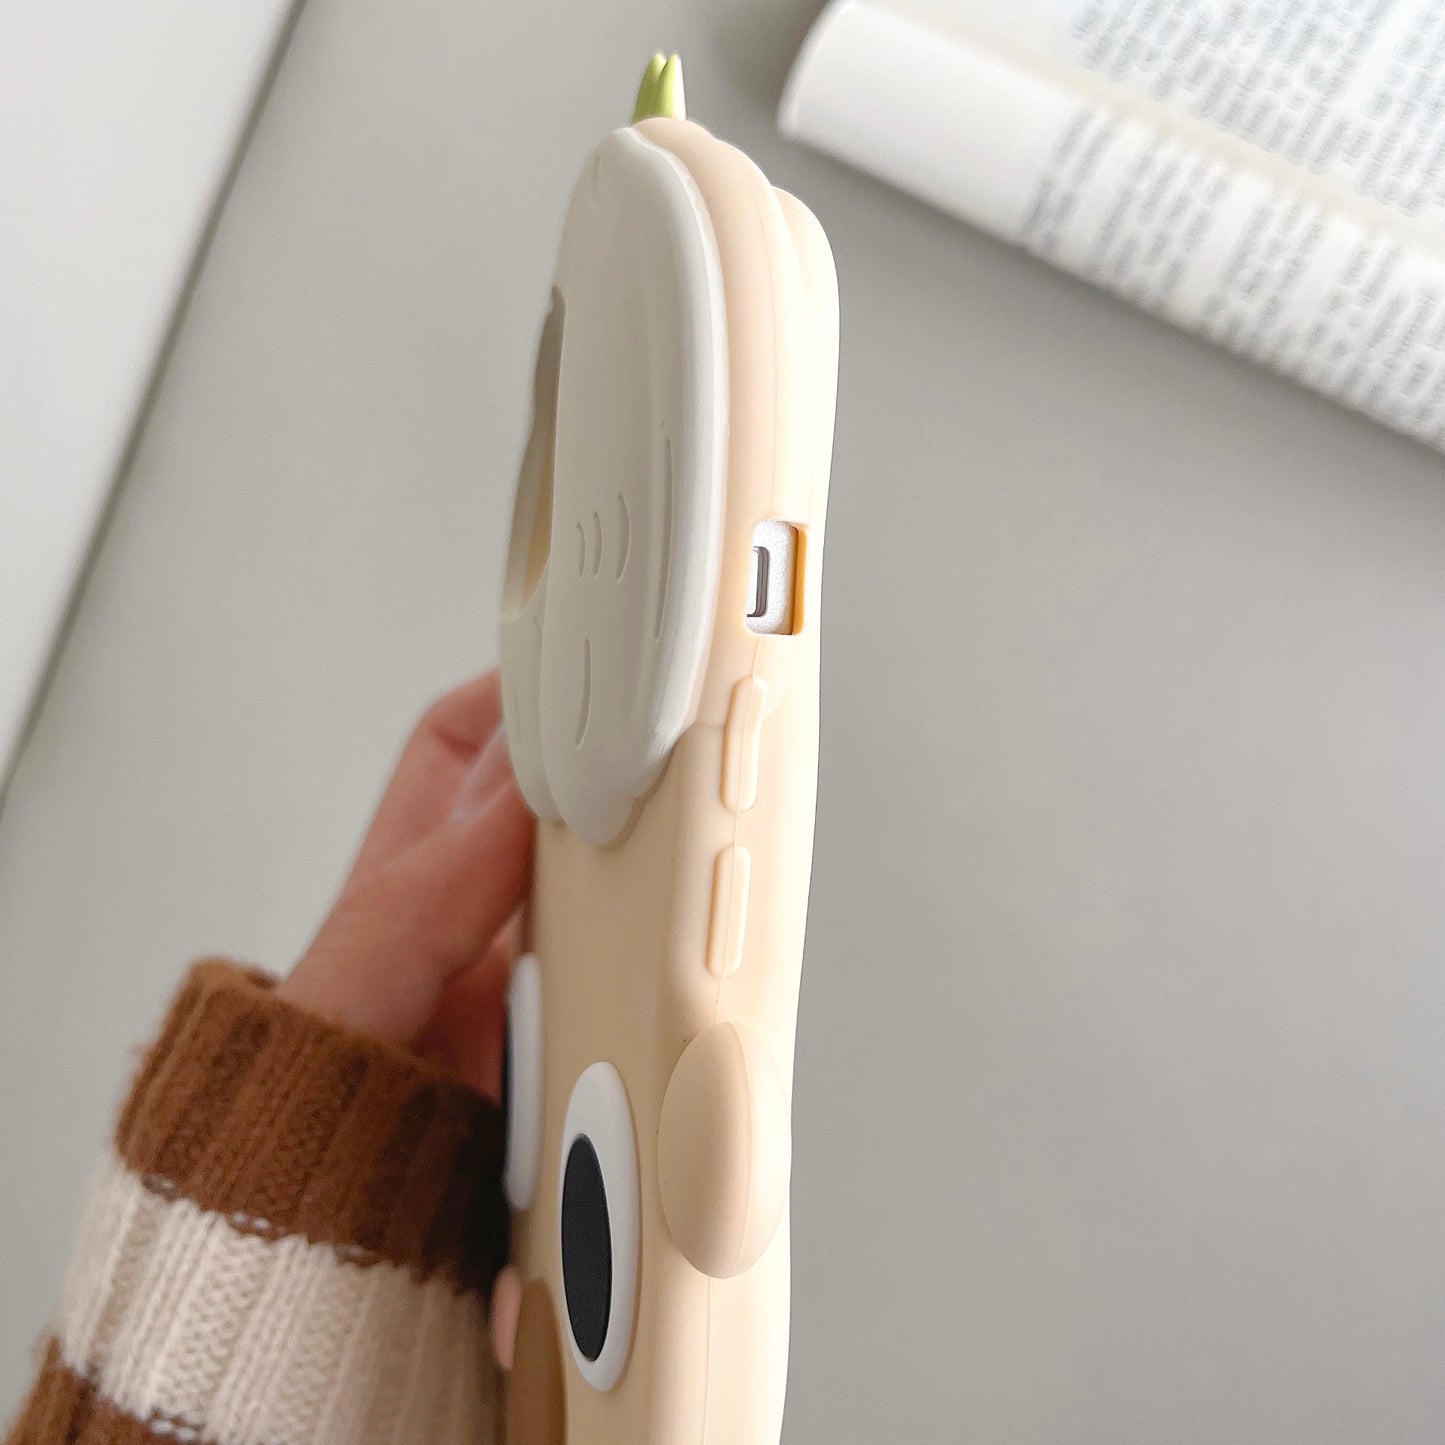 Garlic shaped phone case,Lovely and quirky,iPhone11-14Promax.